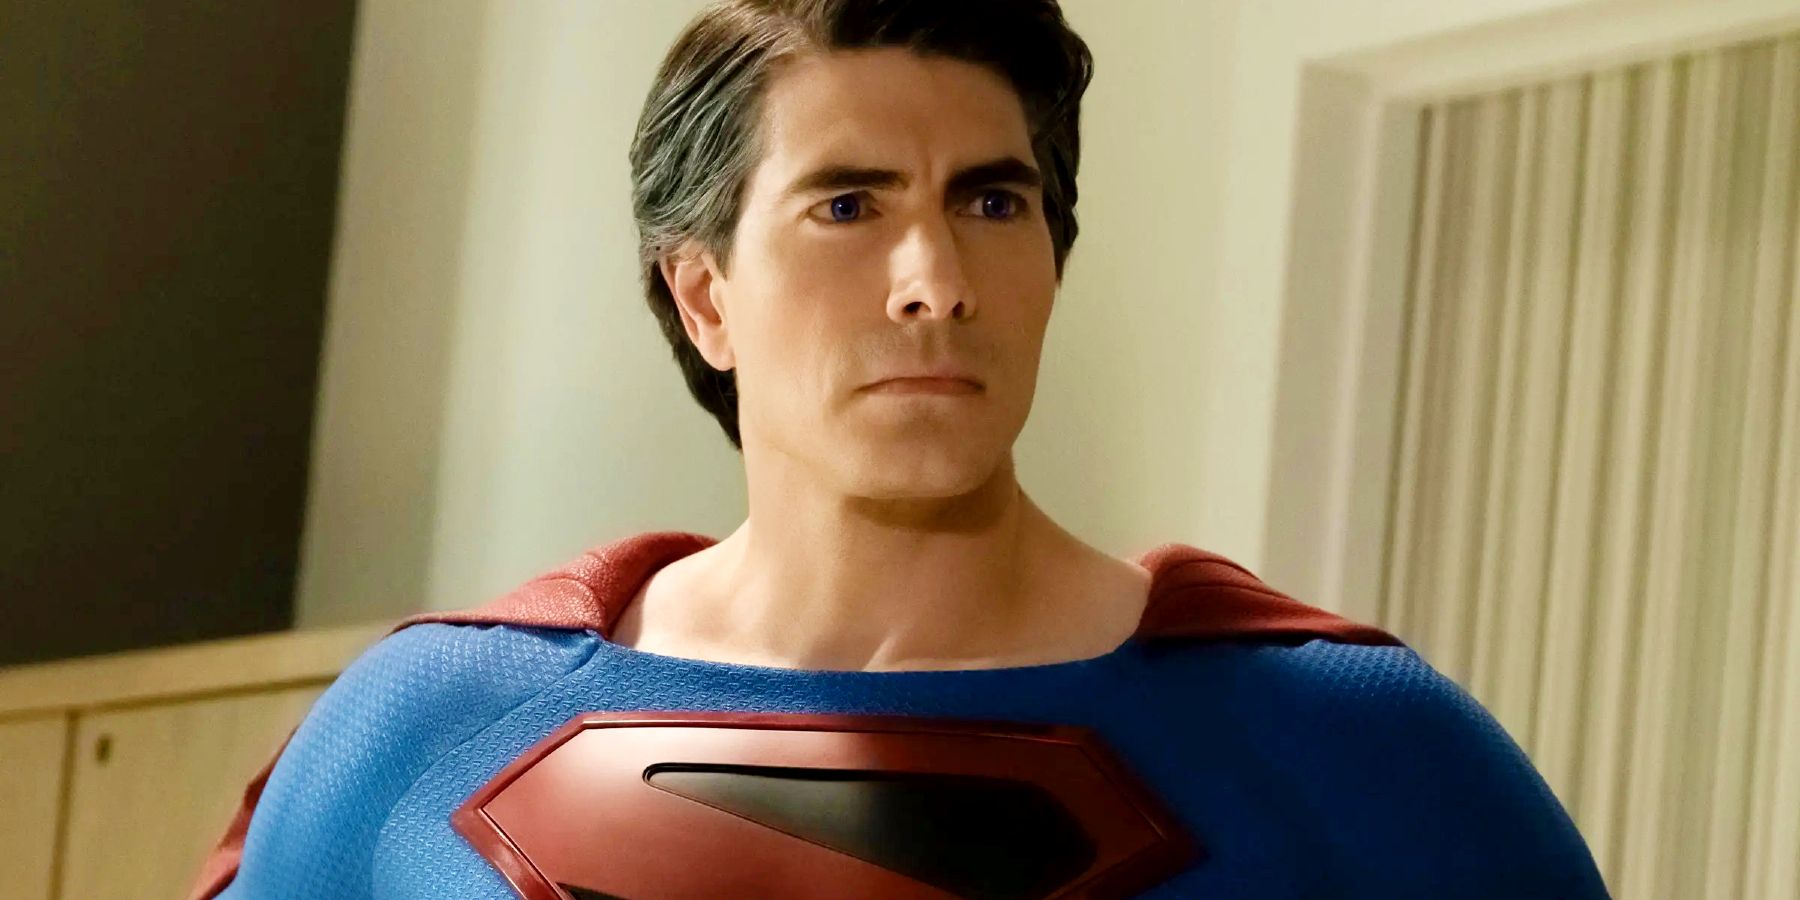 Brandon Routh as Superman in Crisis on Infinite Earths Arrowverse crossover